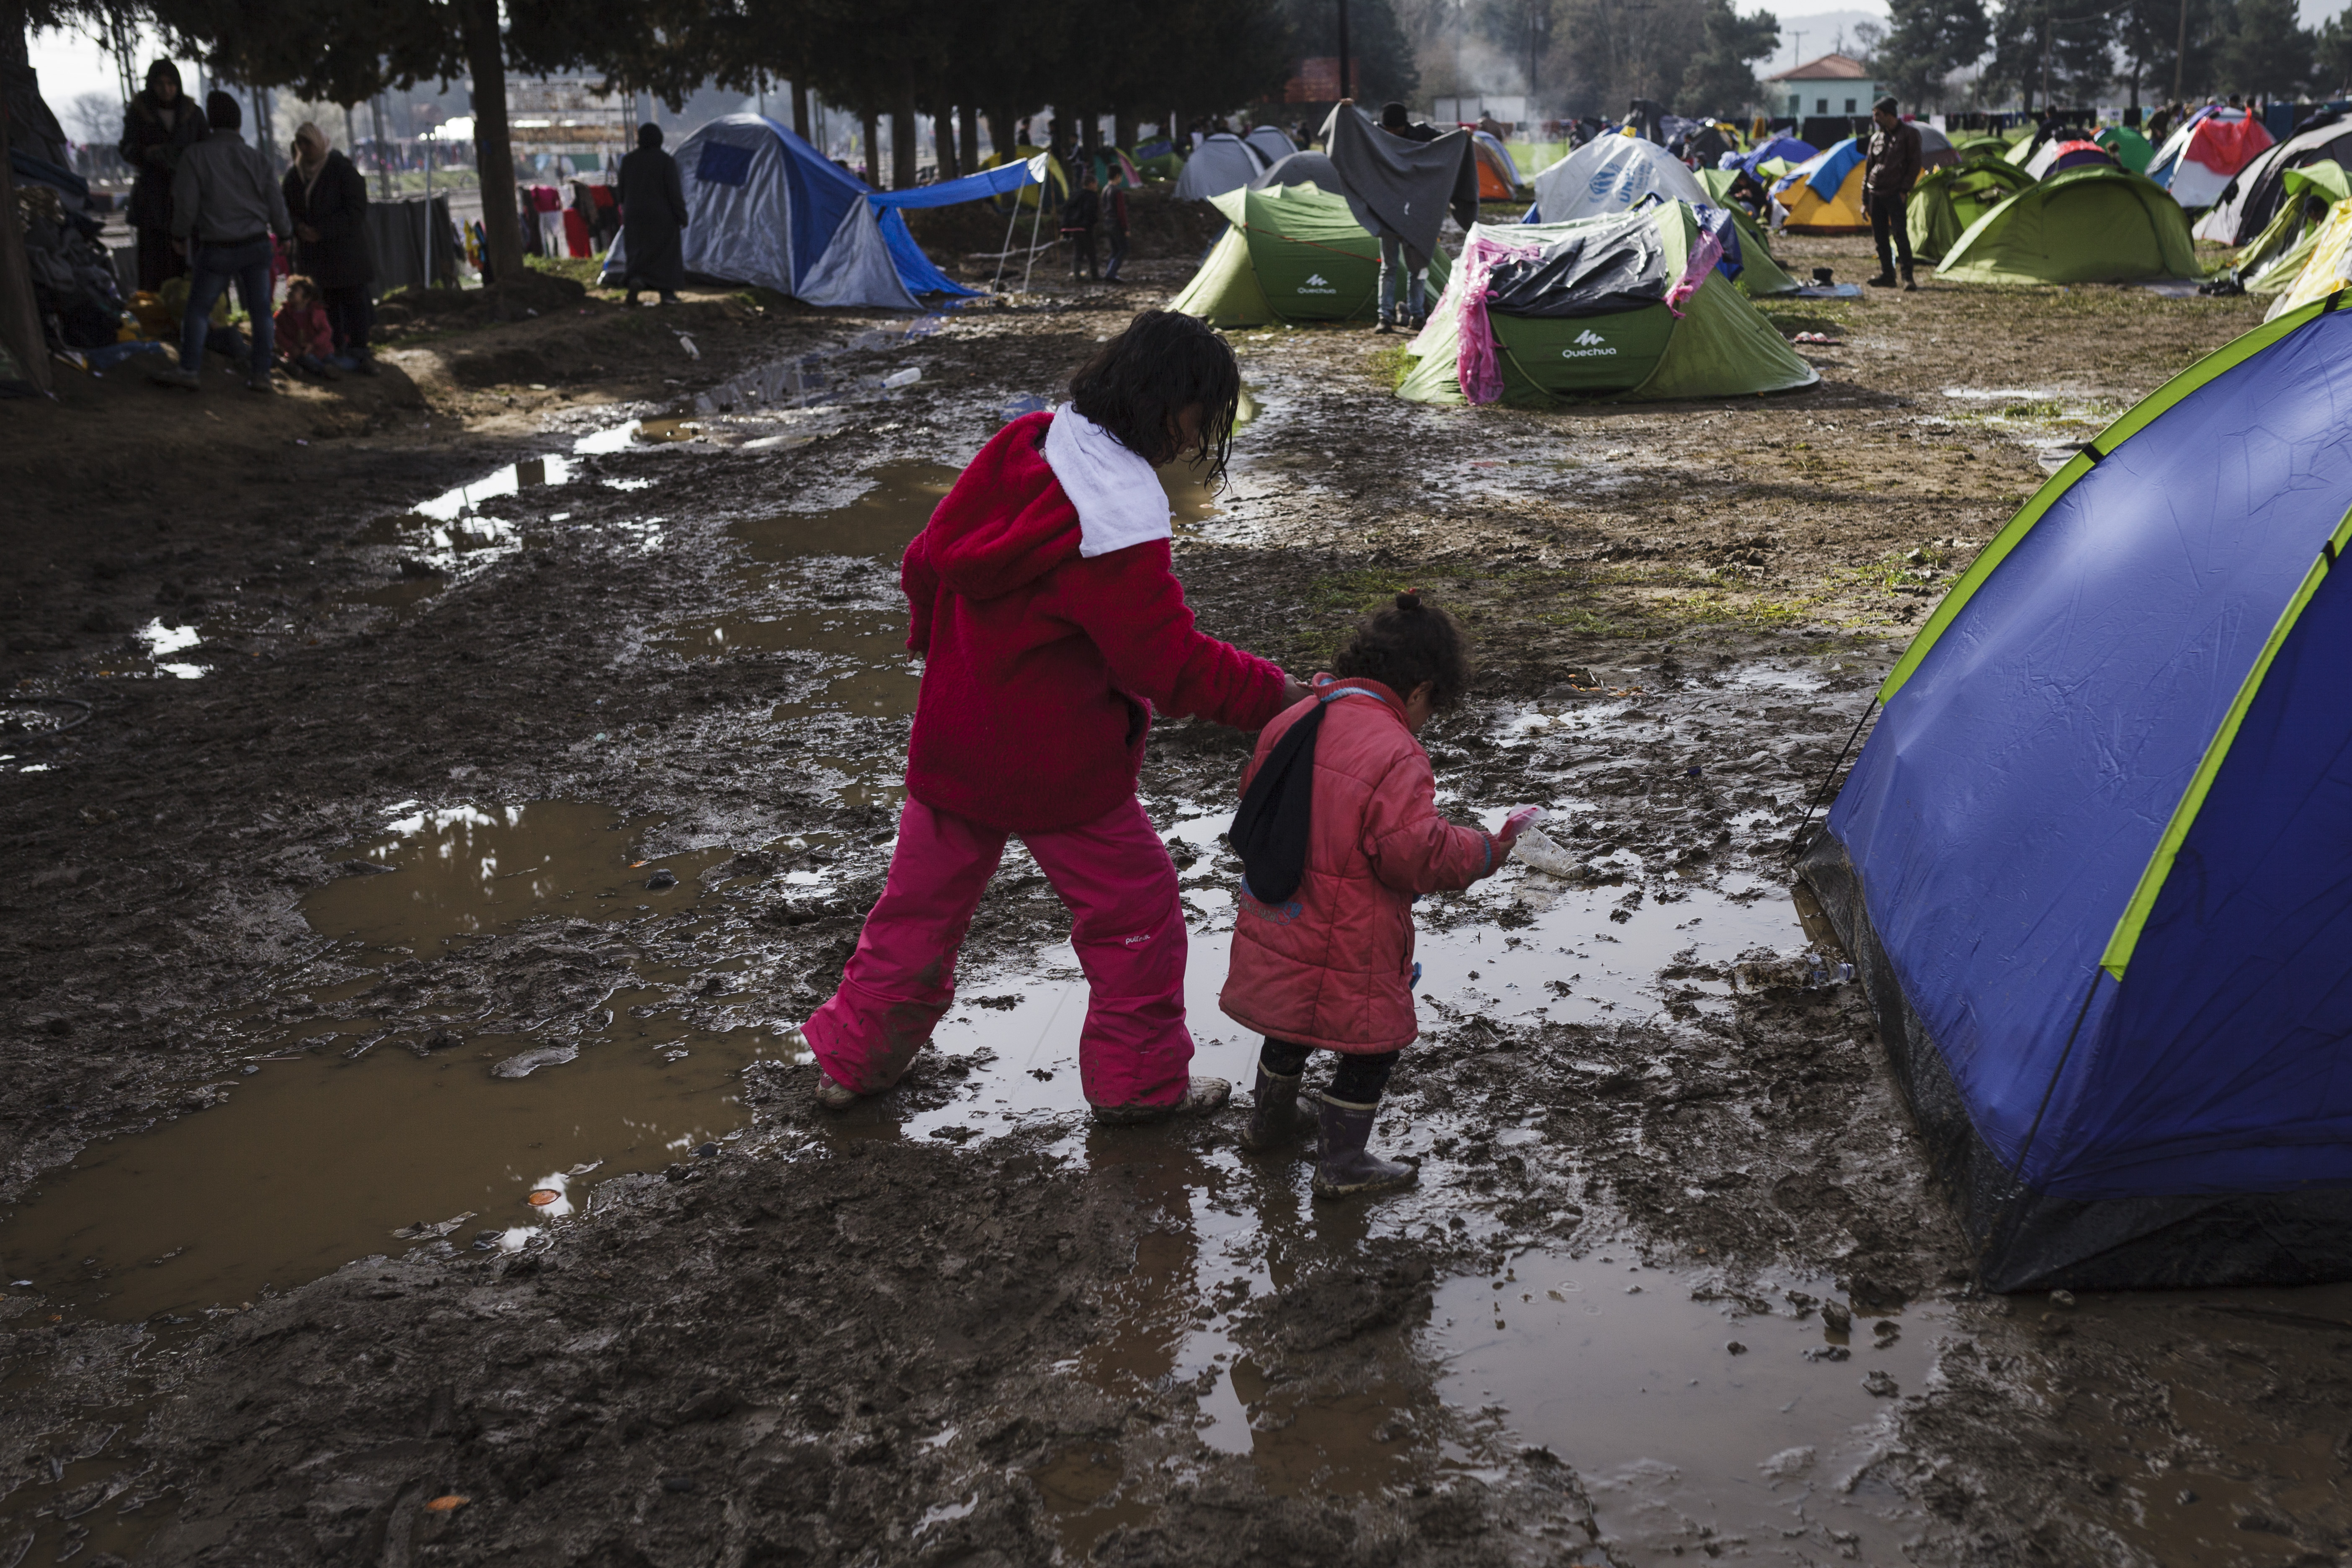 Two young girls walk through a makeshift camp near the village of Idomeni in Greece.